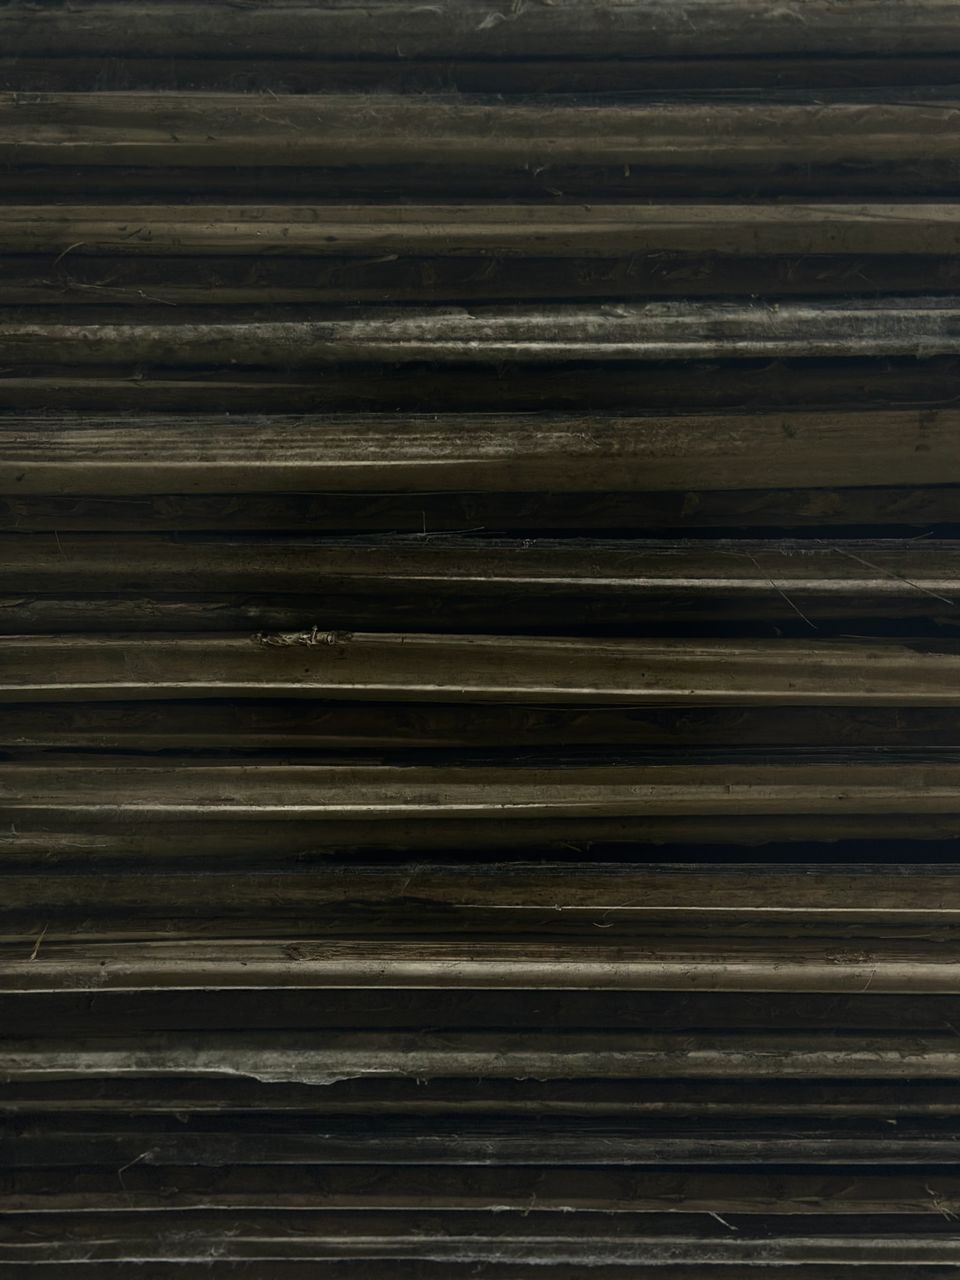 backgrounds, full frame, wood, pattern, no people, textured, black, line, floor, close-up, wall, brown, metal, wood stain, wood flooring, hardwood, day, repetition, outdoors, white